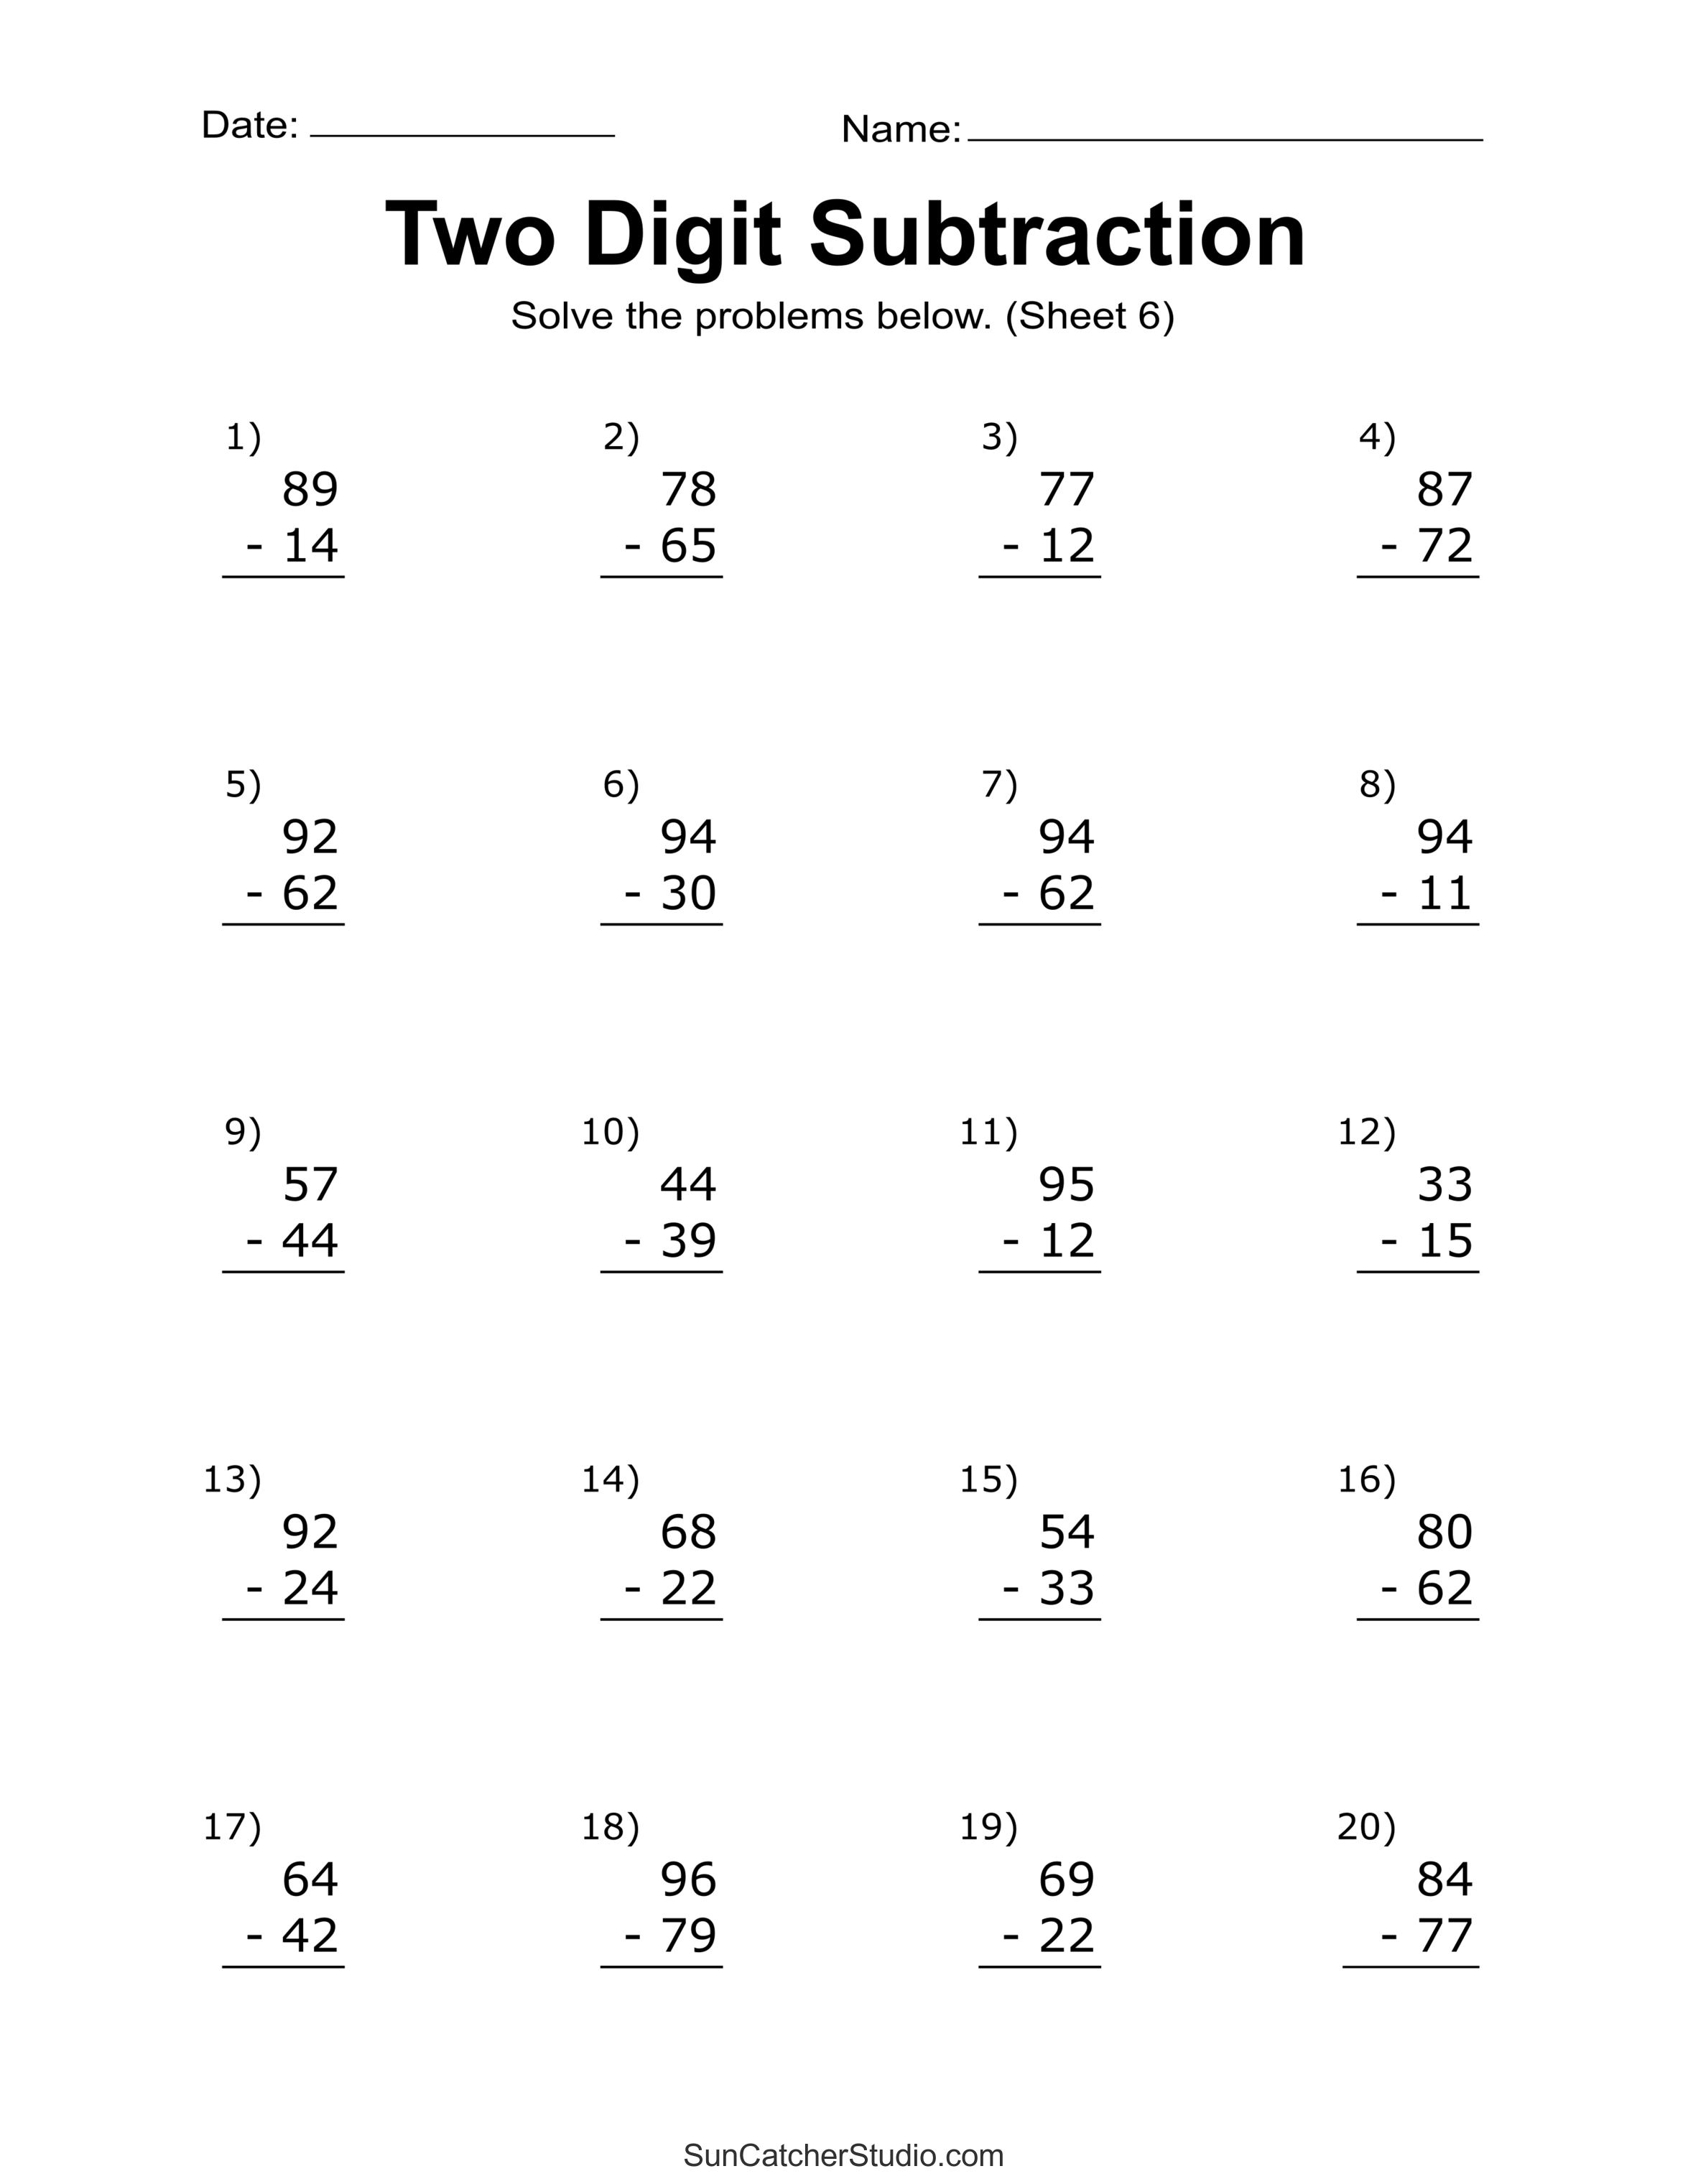 Two-Digit Subtraction Worksheets (Printable Math Drills) – DIY Projects ...